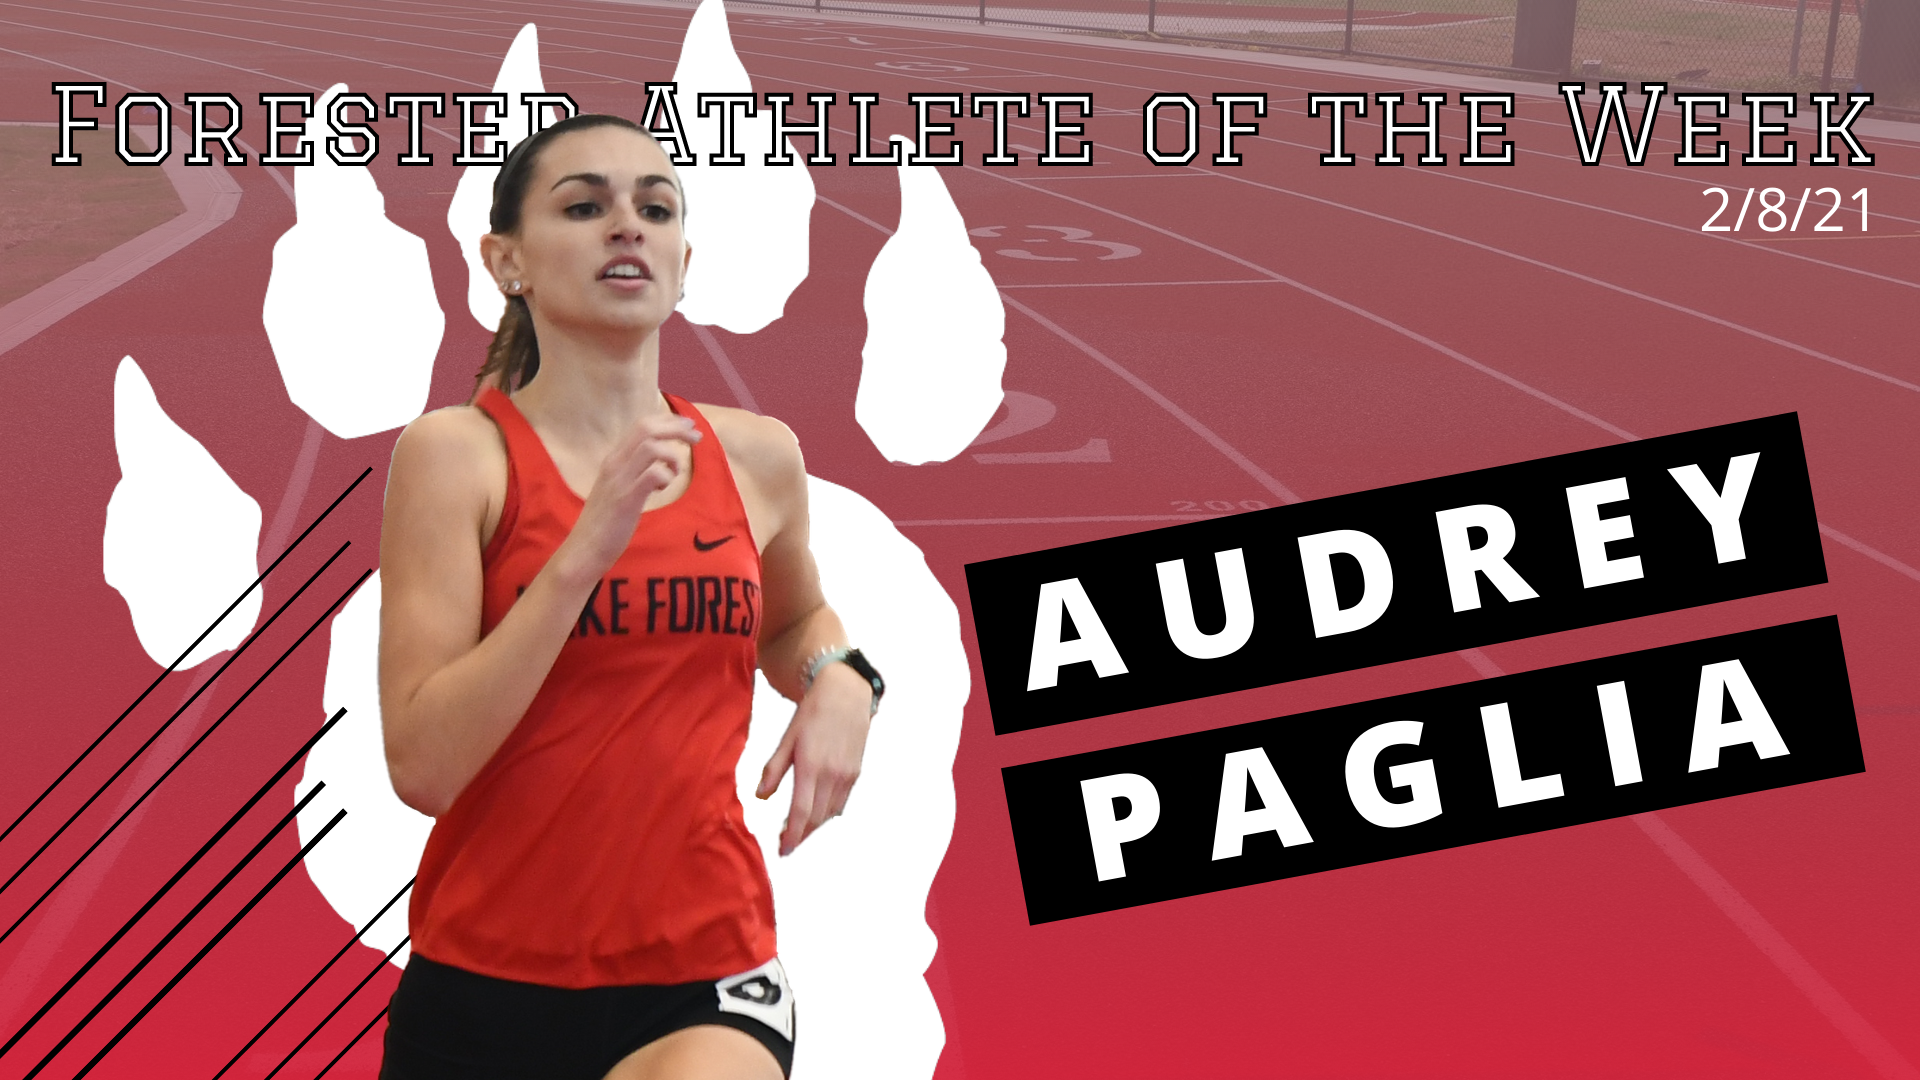 Audrey Paglia Earns Woman's Forester Athlete of the Week Honors